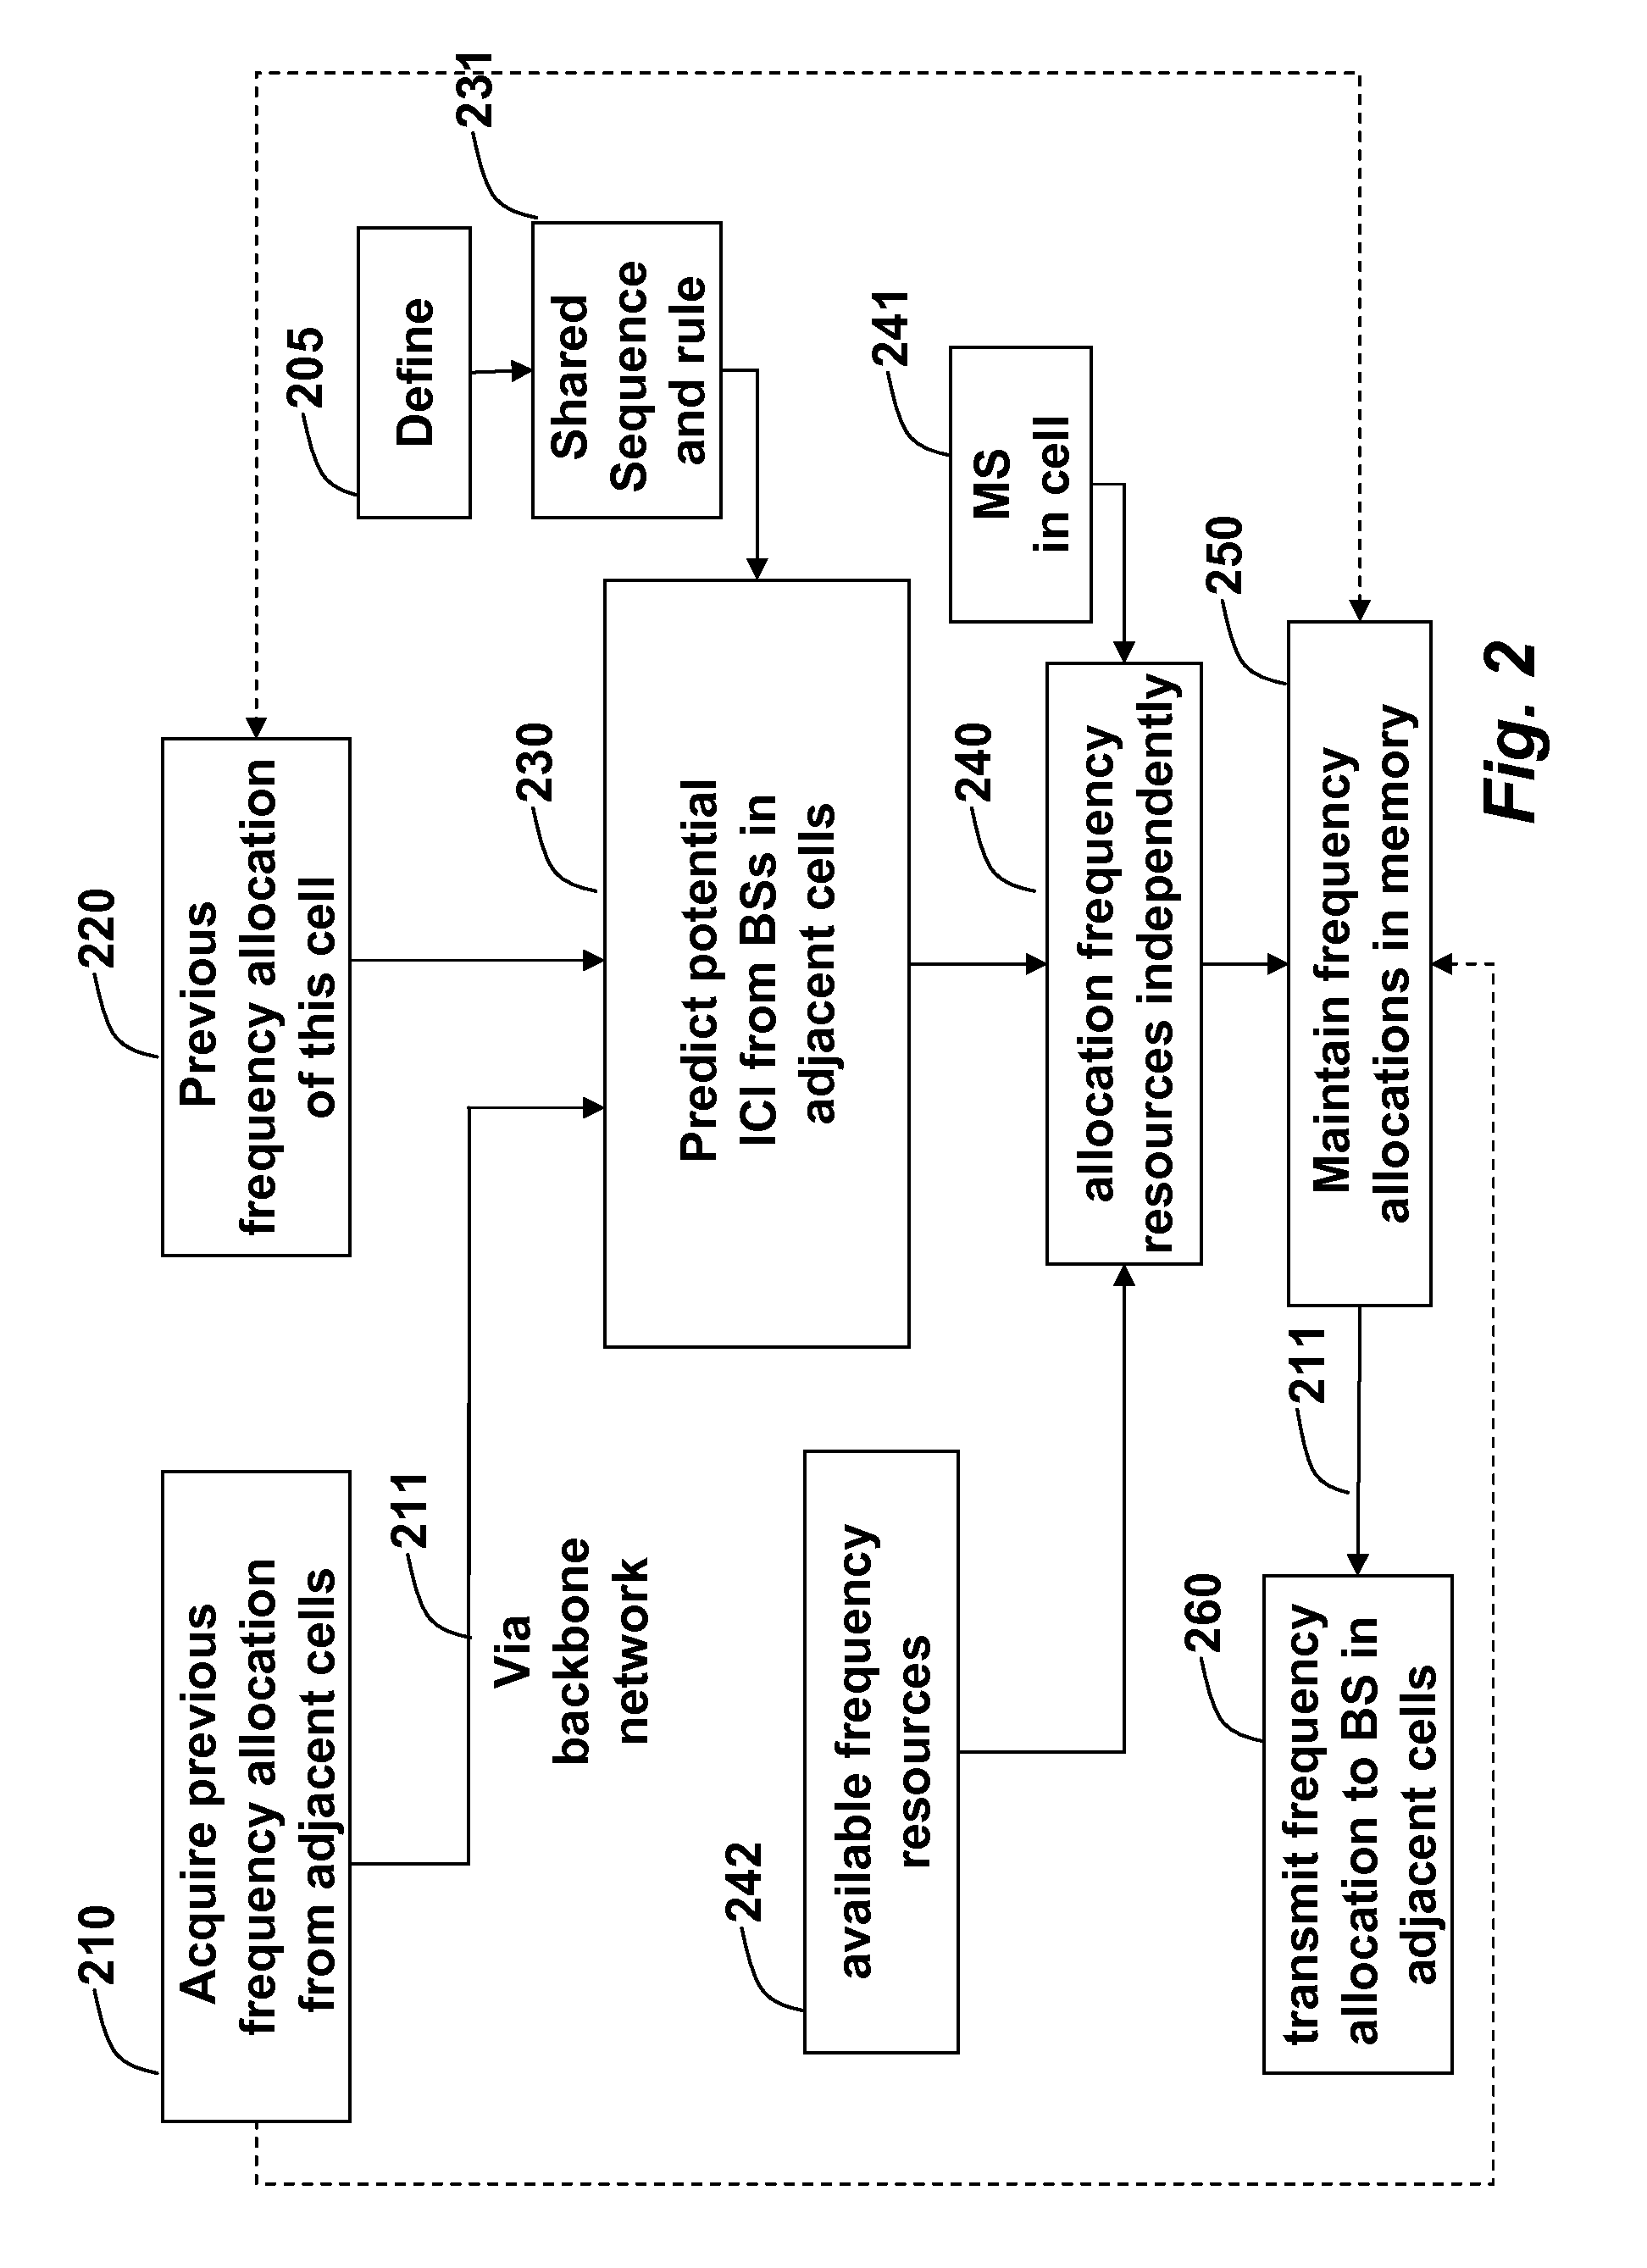 Inter-cell interference prediction for frequency resource allocation